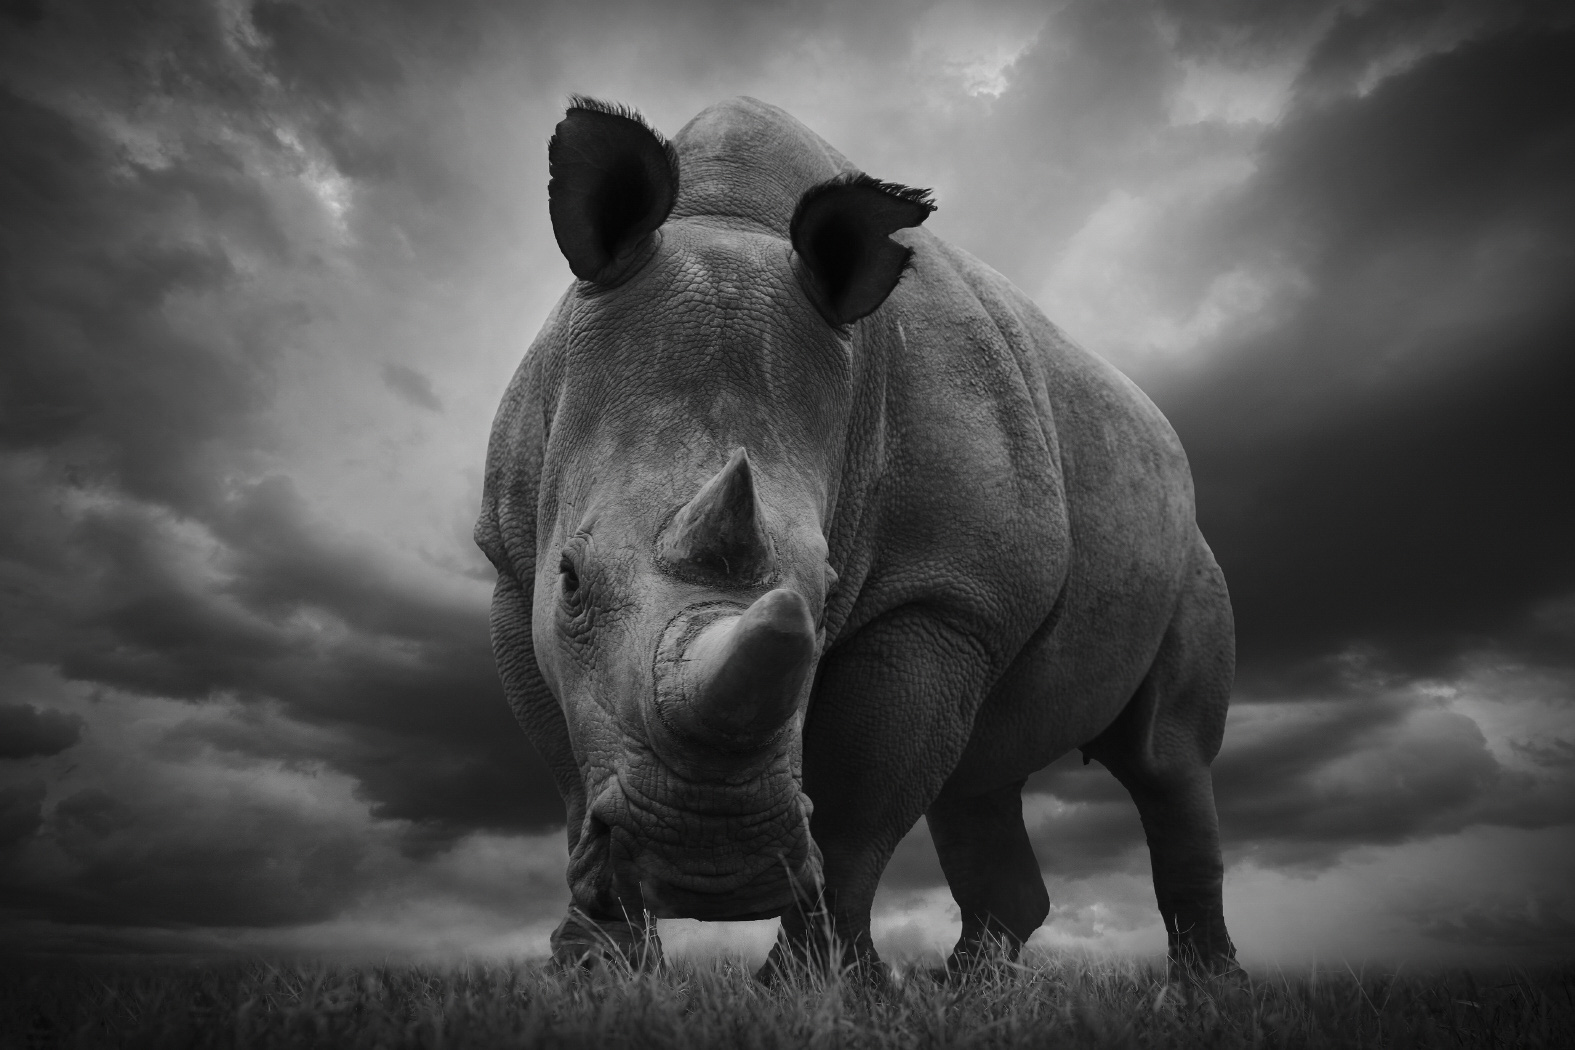 A rhino in Africa. Photo: Bjorn Persson